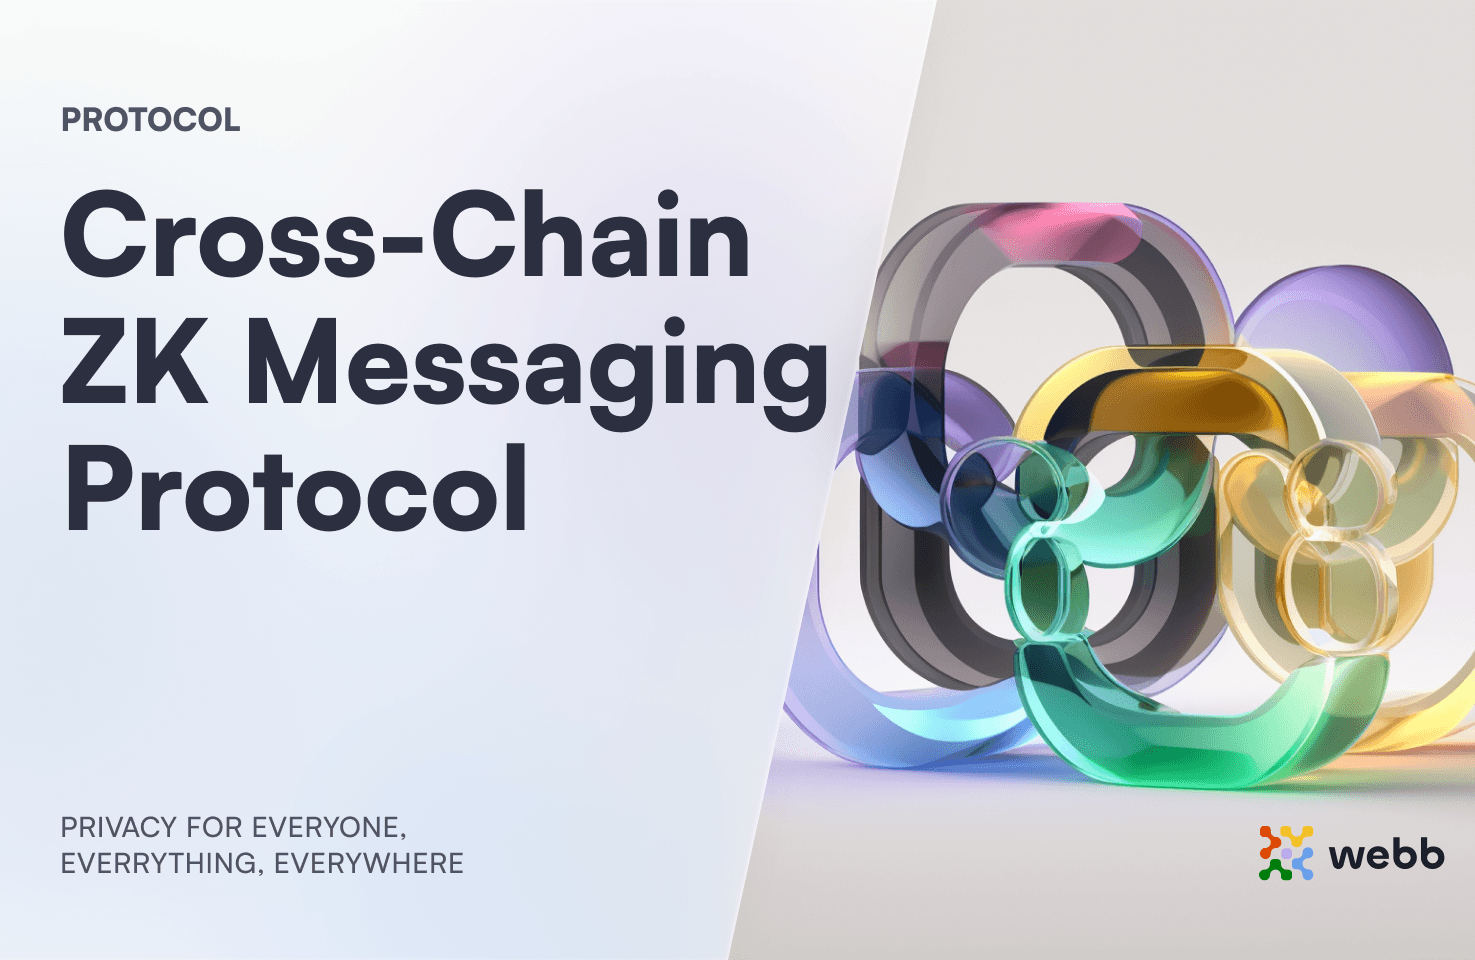 Introduction to Webb - A cross-chain zero-knowledge messaging protocol